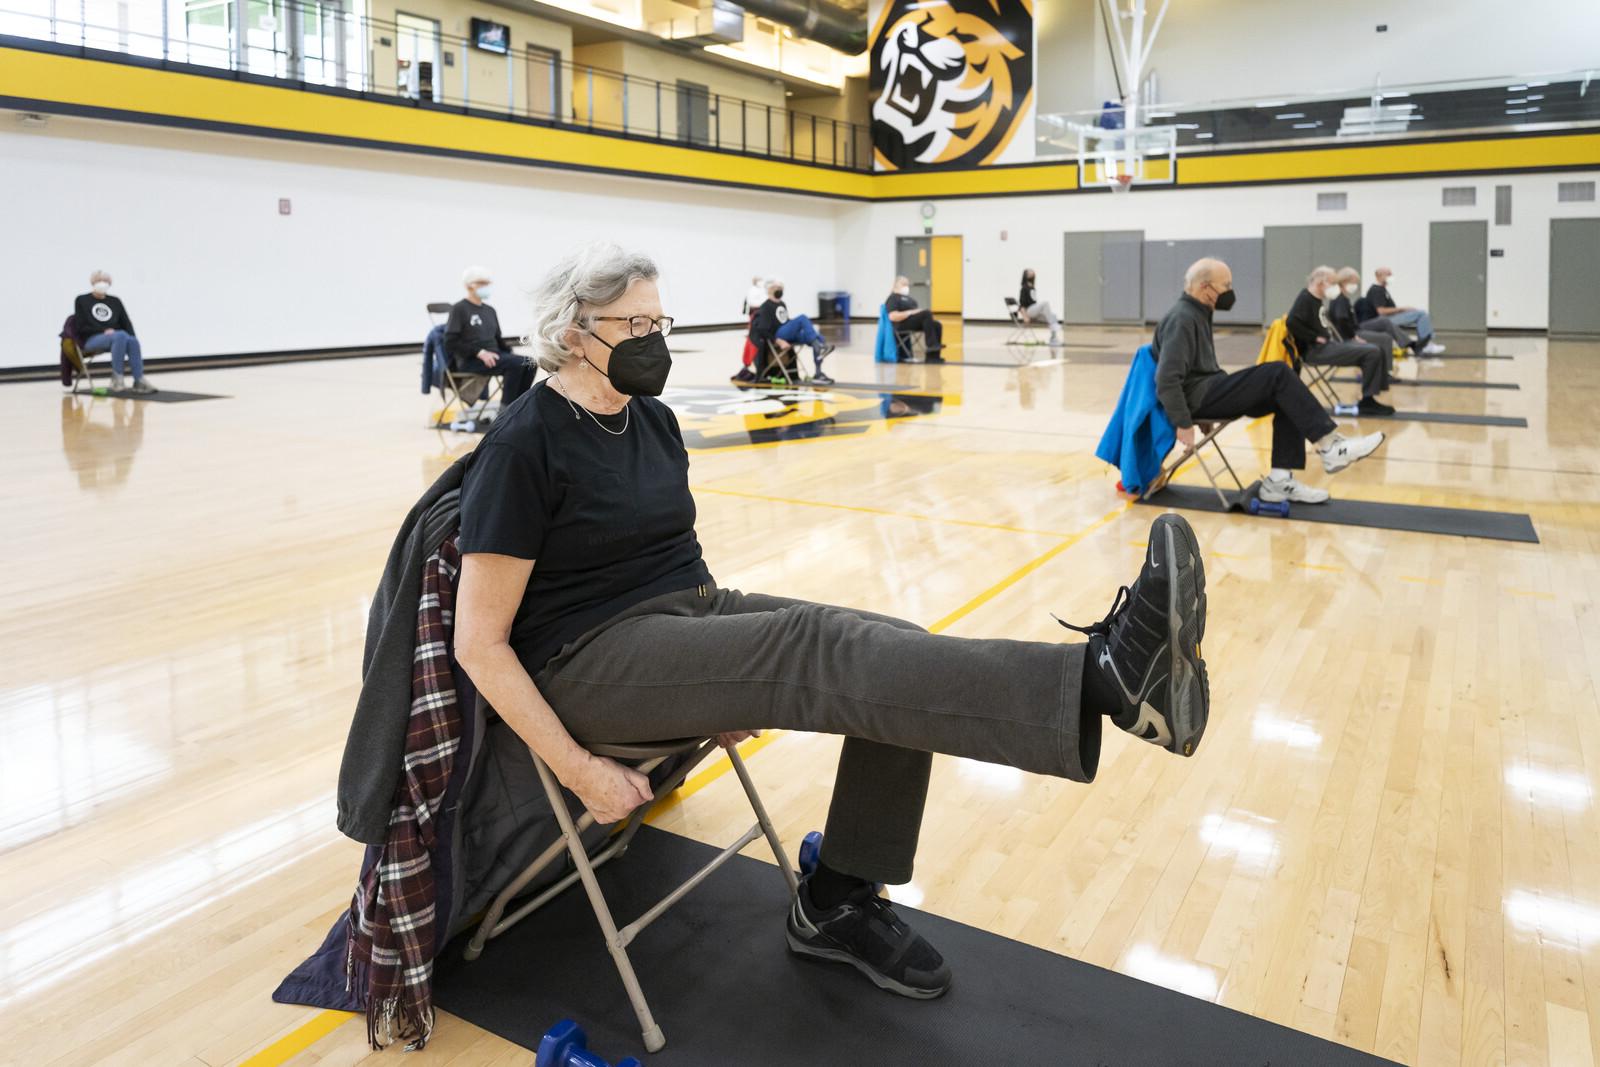 Kathy Lindeman during a chair exercise <span class="cc-gallery-credit">[Lonnie Timmons III]</span>